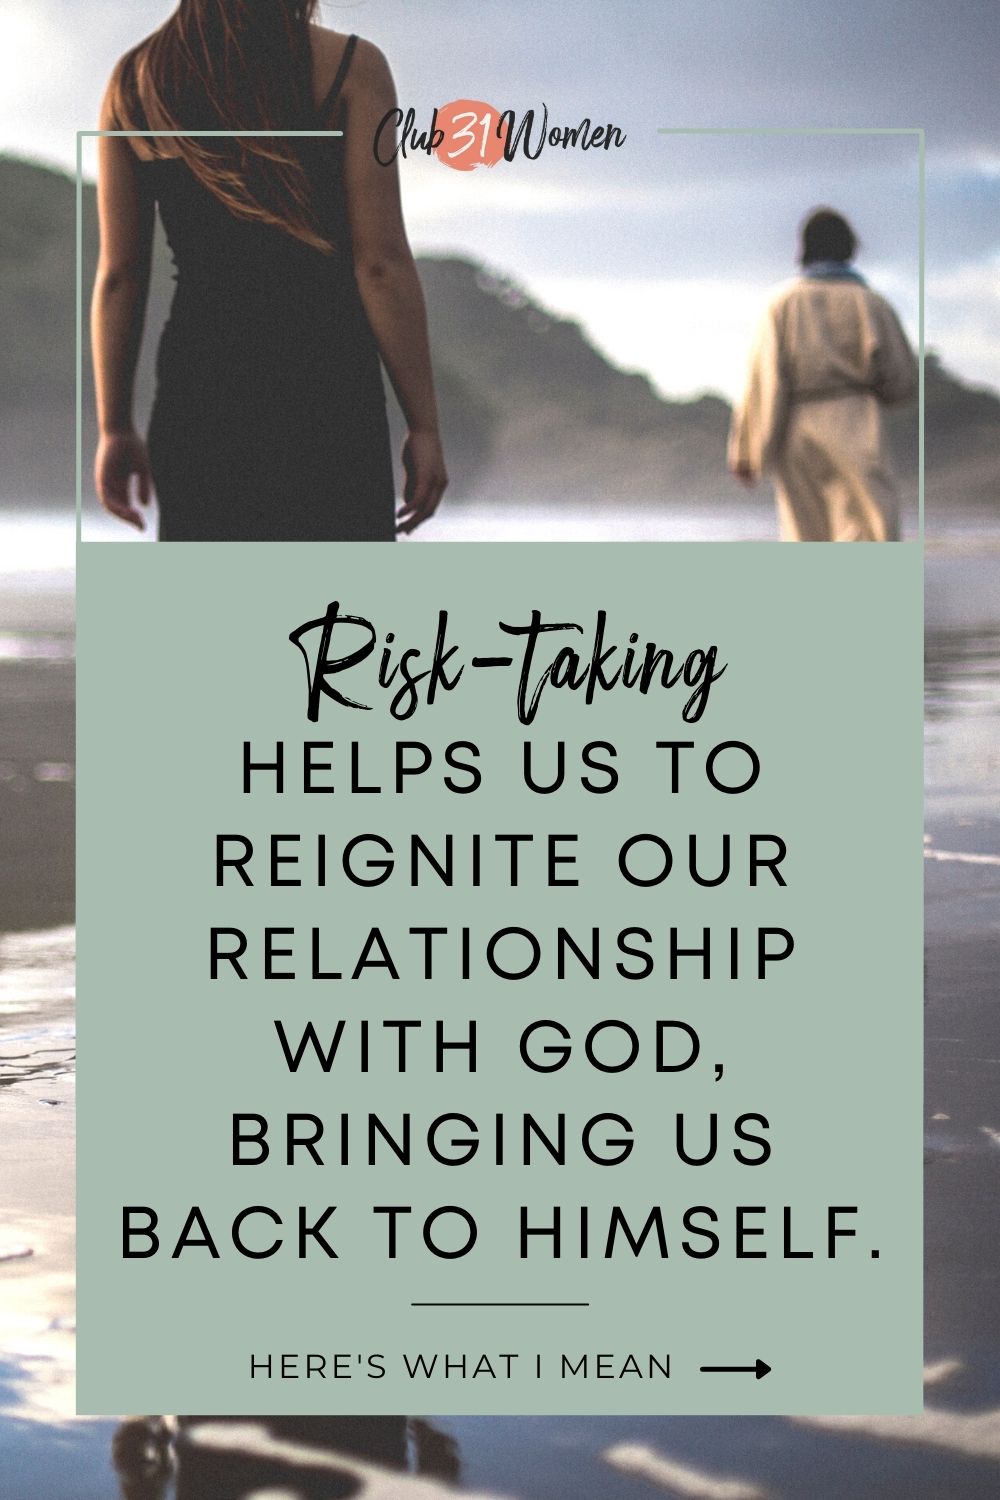 Adventure awaits those willing to take a risk for the kingdom. A deeper relationship with God is built when we trust Him with the impossible. via @Club31Women